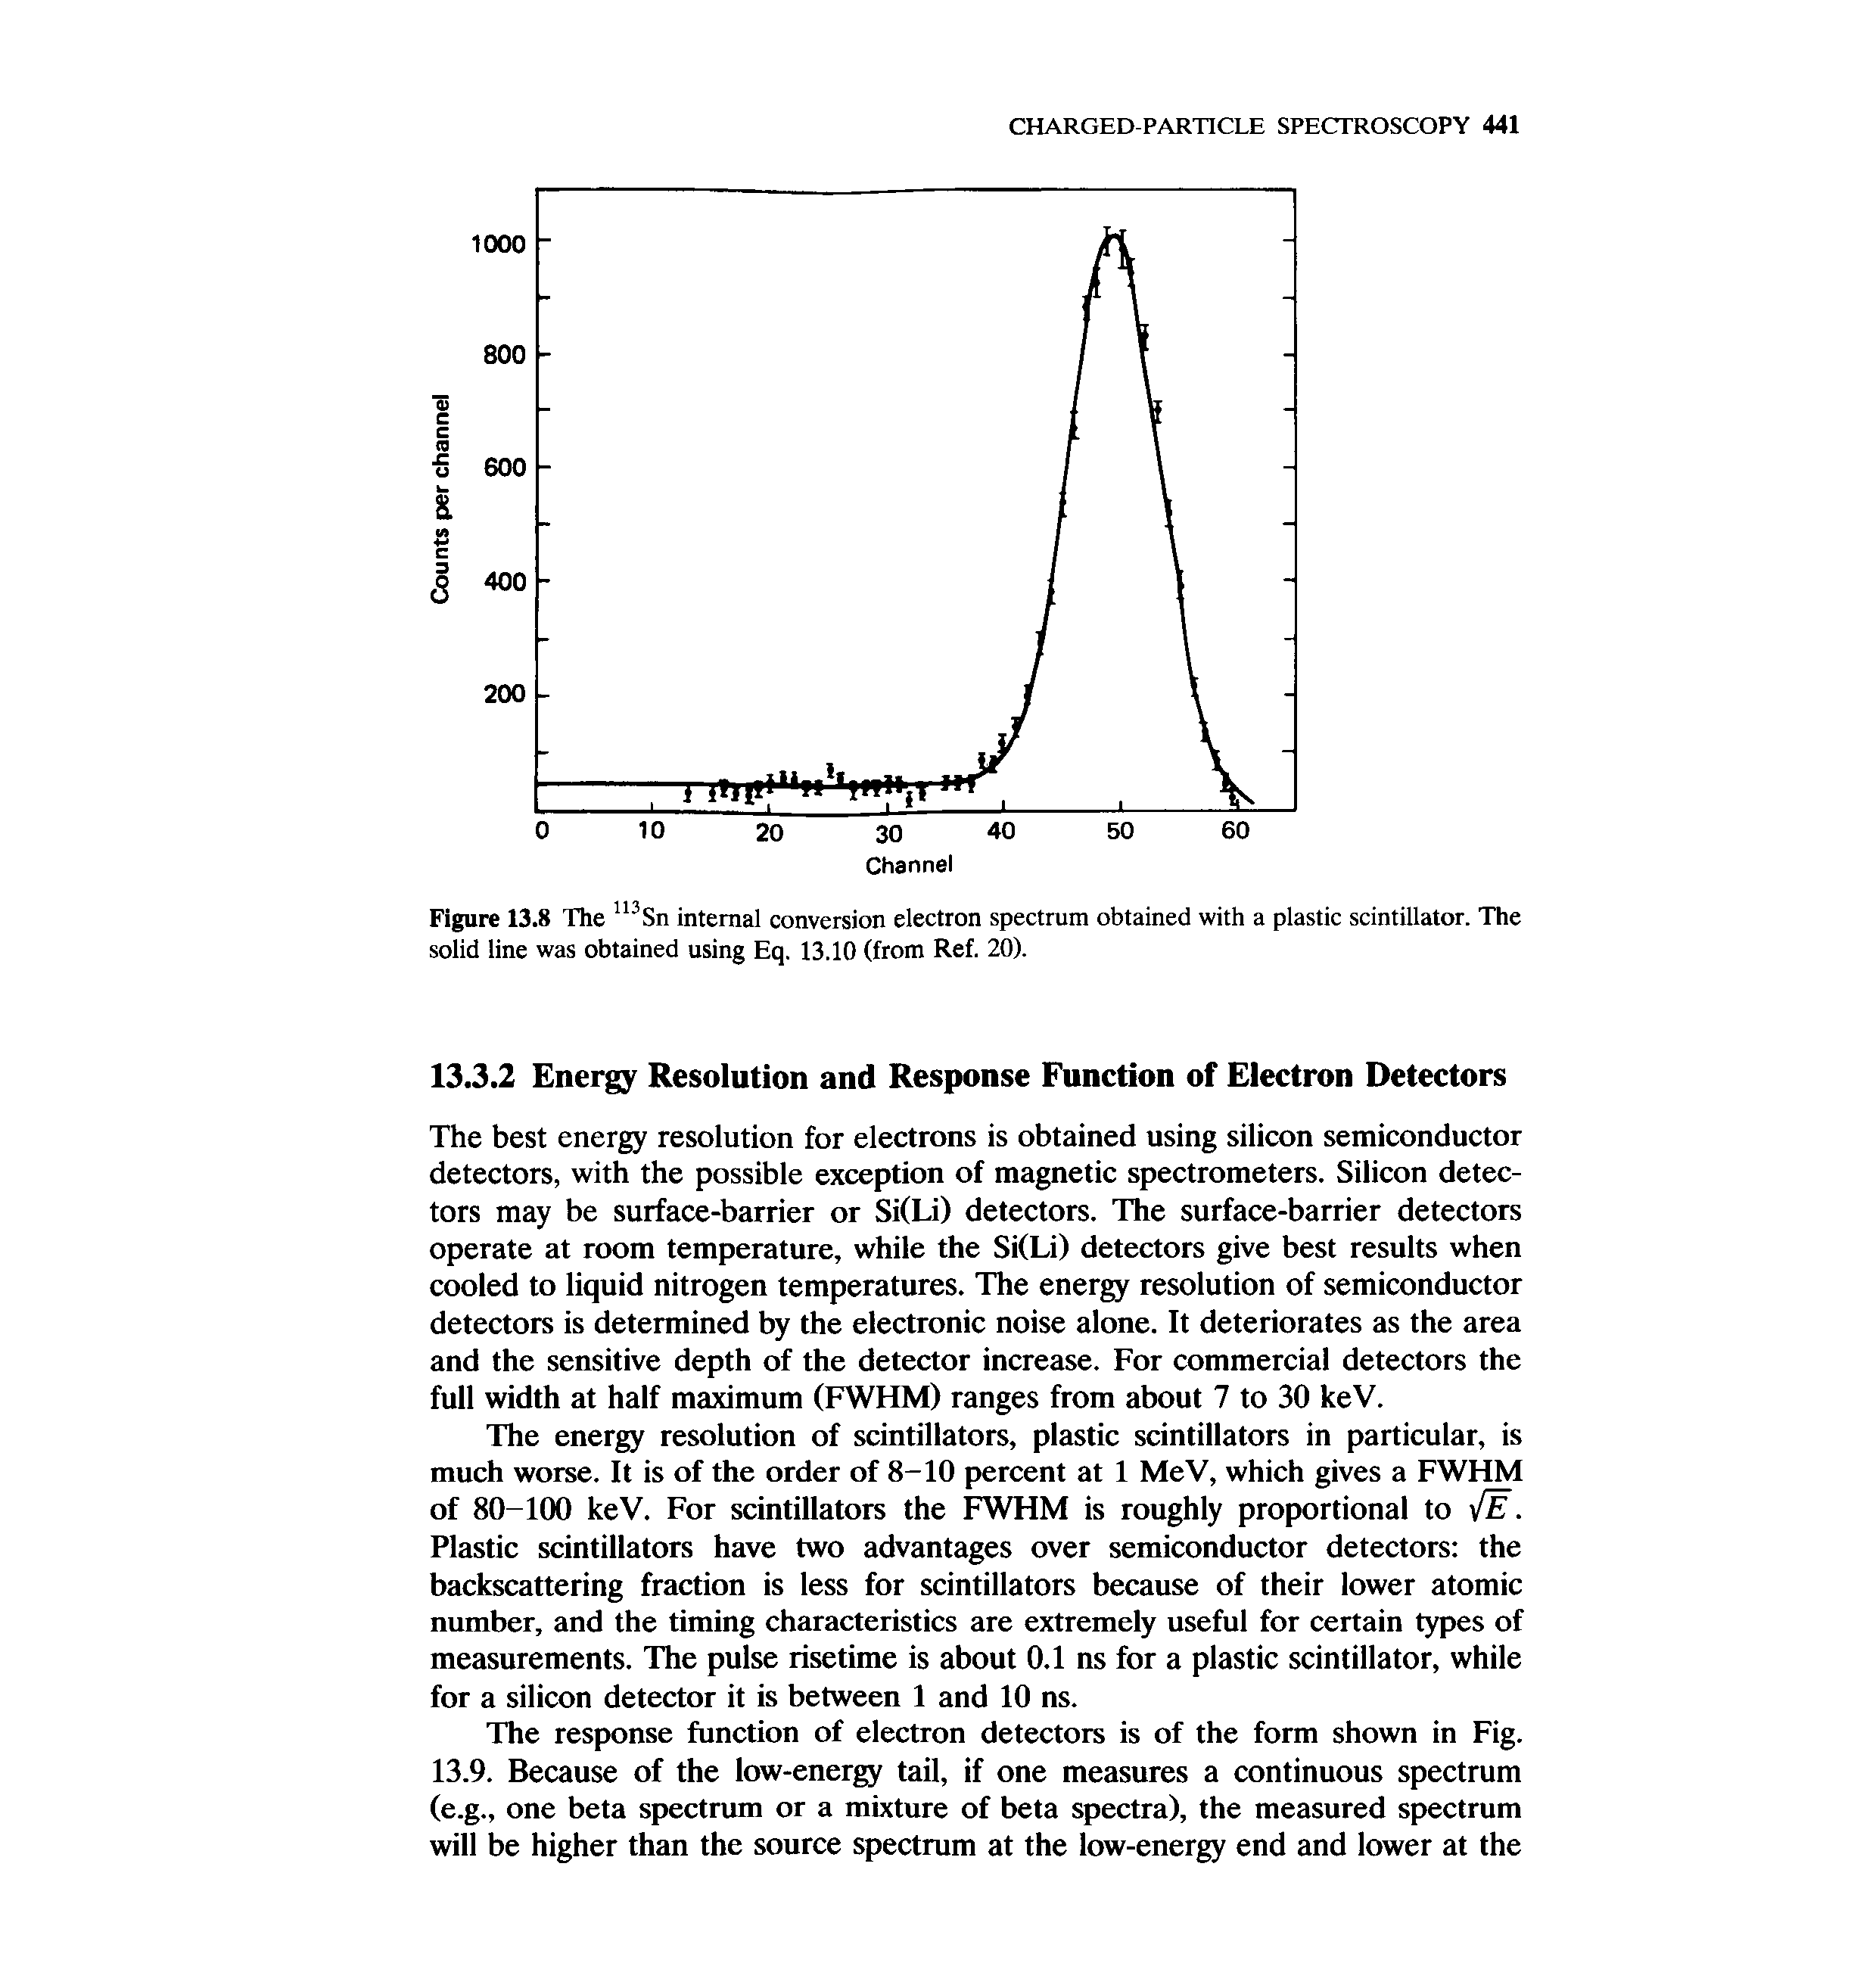 Figure 13.8 The internal conversion electron spectrum obtained with a plastic scintillator. The solid line was obtained using Eq. 13.10 (from Ref. 20).